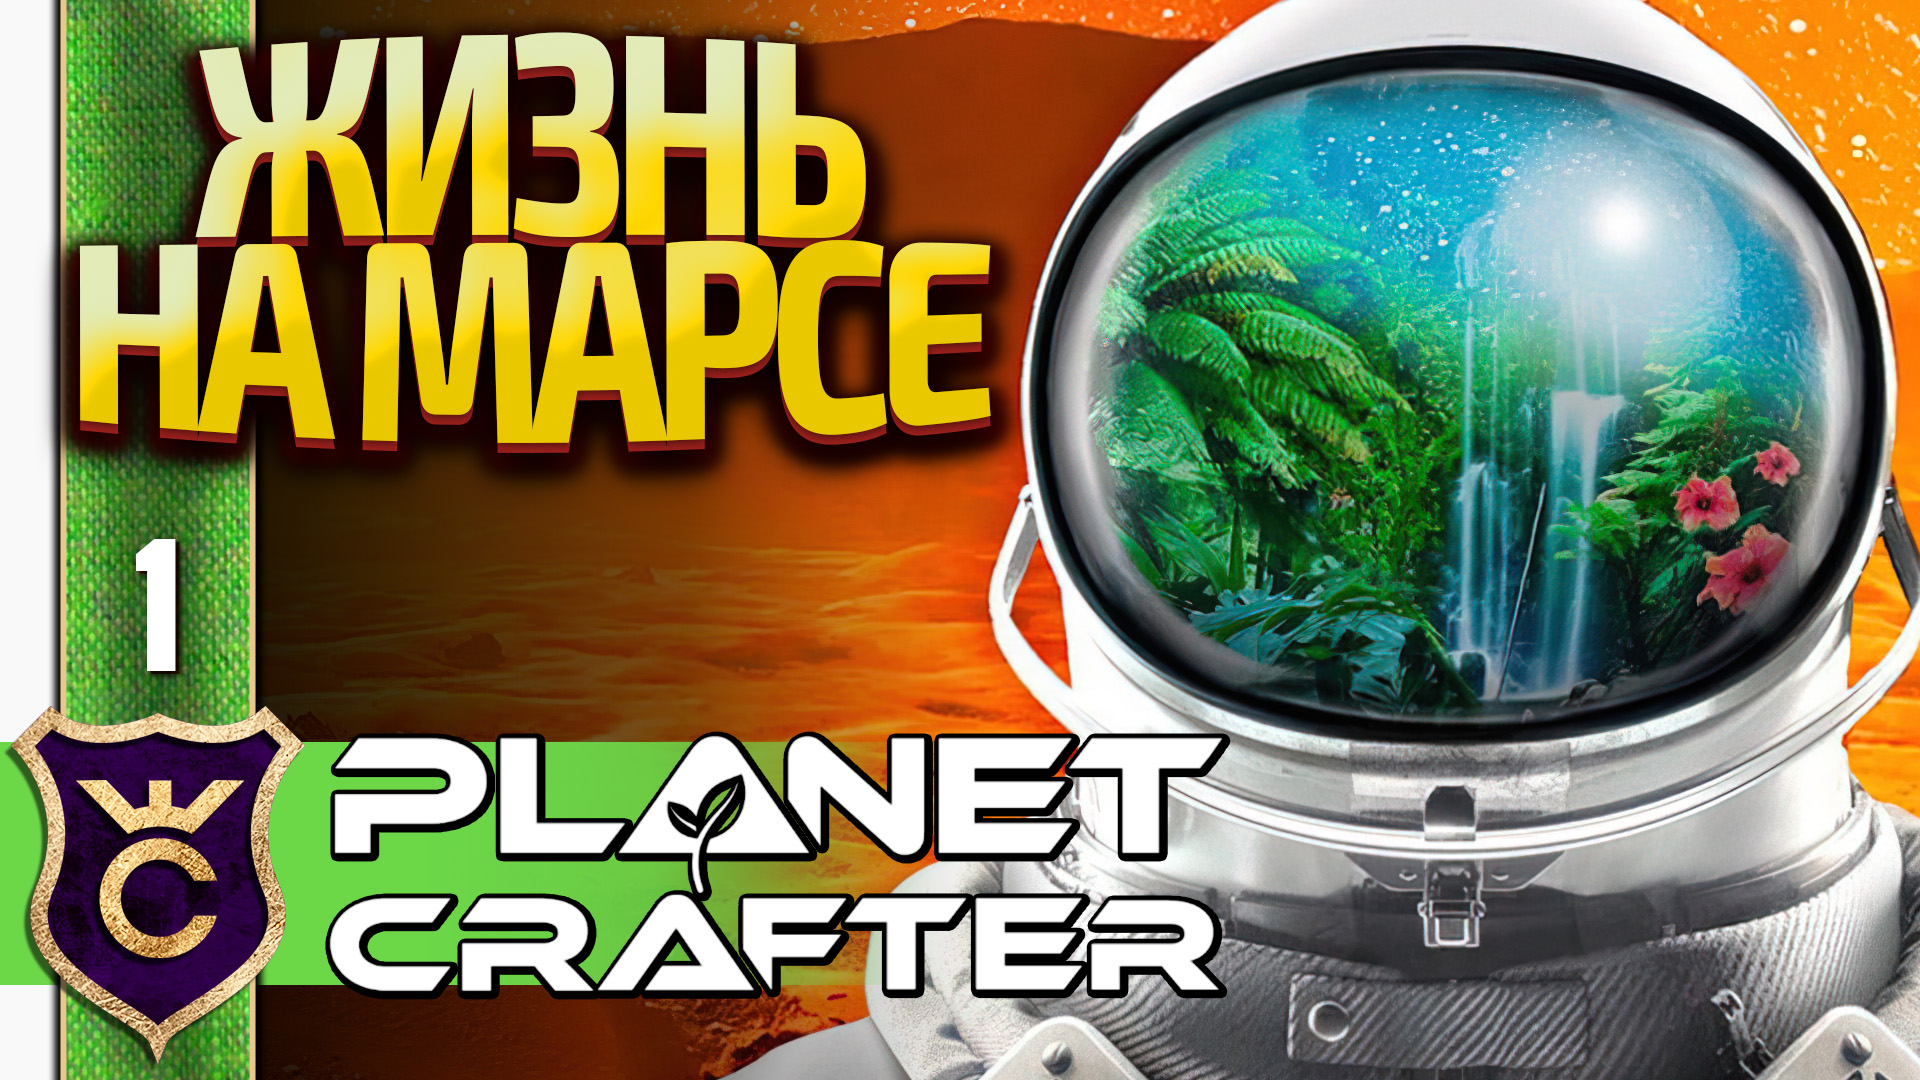 The planet crafter читы